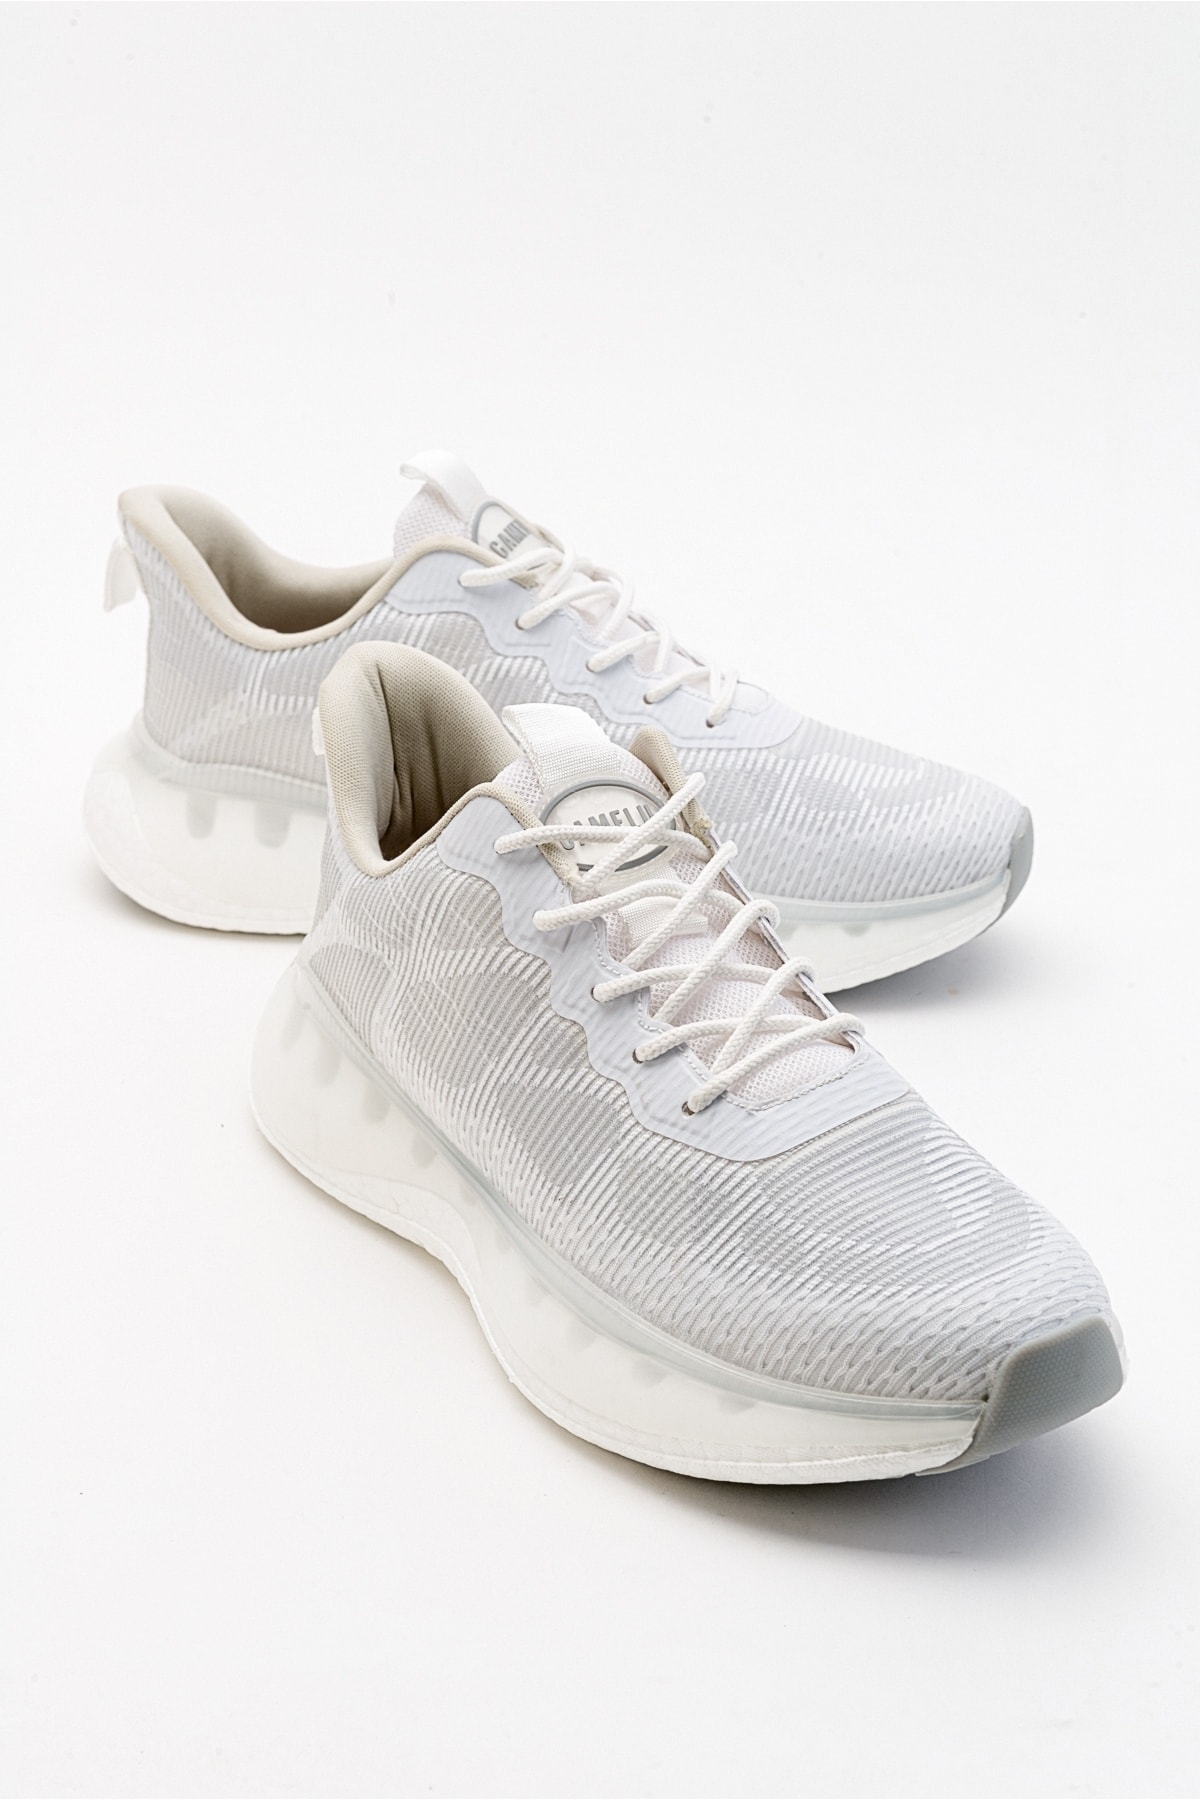 LuviShoes Gruff White Men's Sneakers